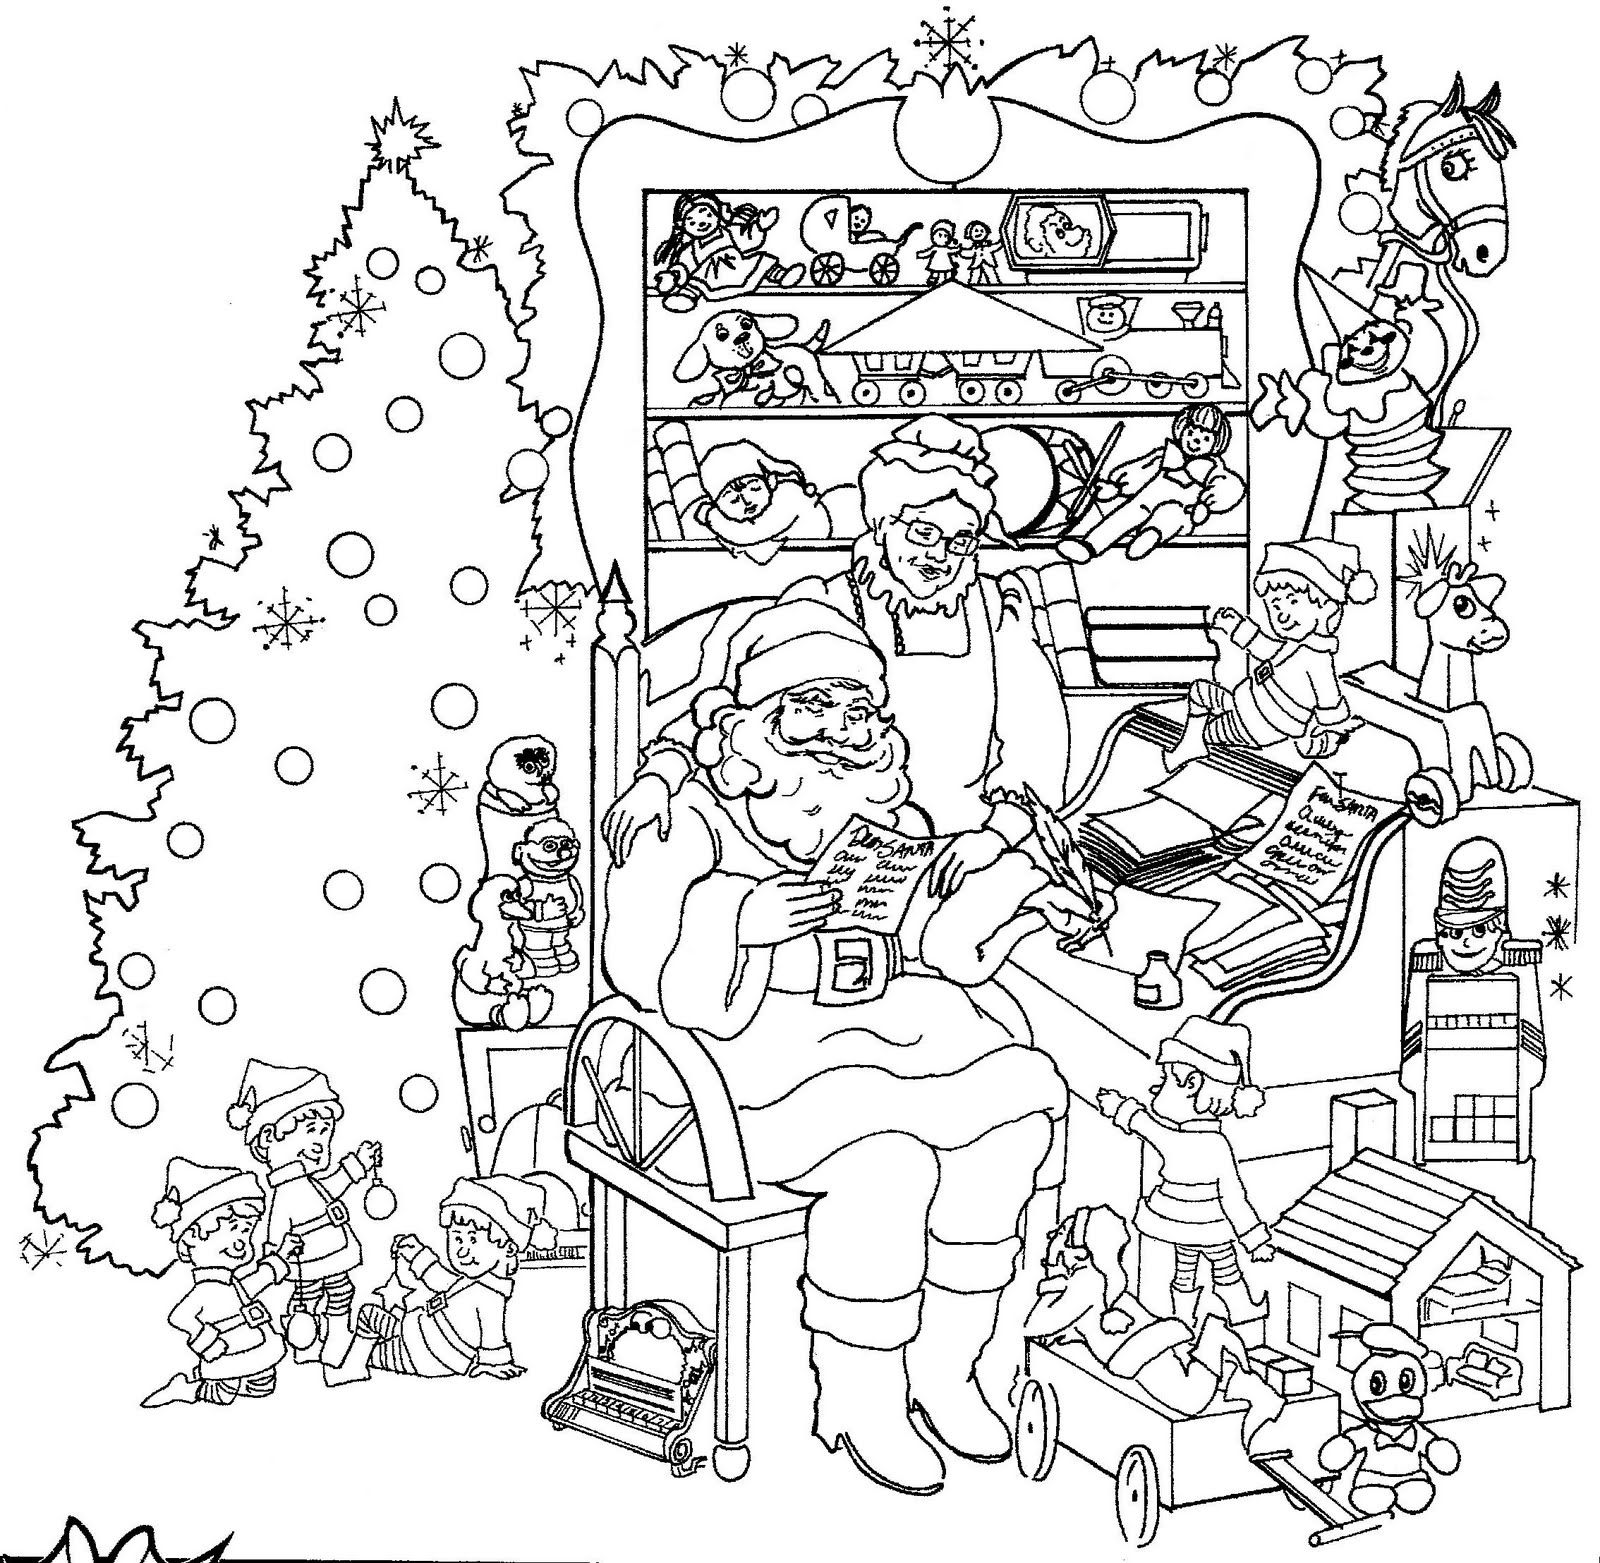 Christmas Coloring Page Pdf - Ð¡oloring Pages For All Ages